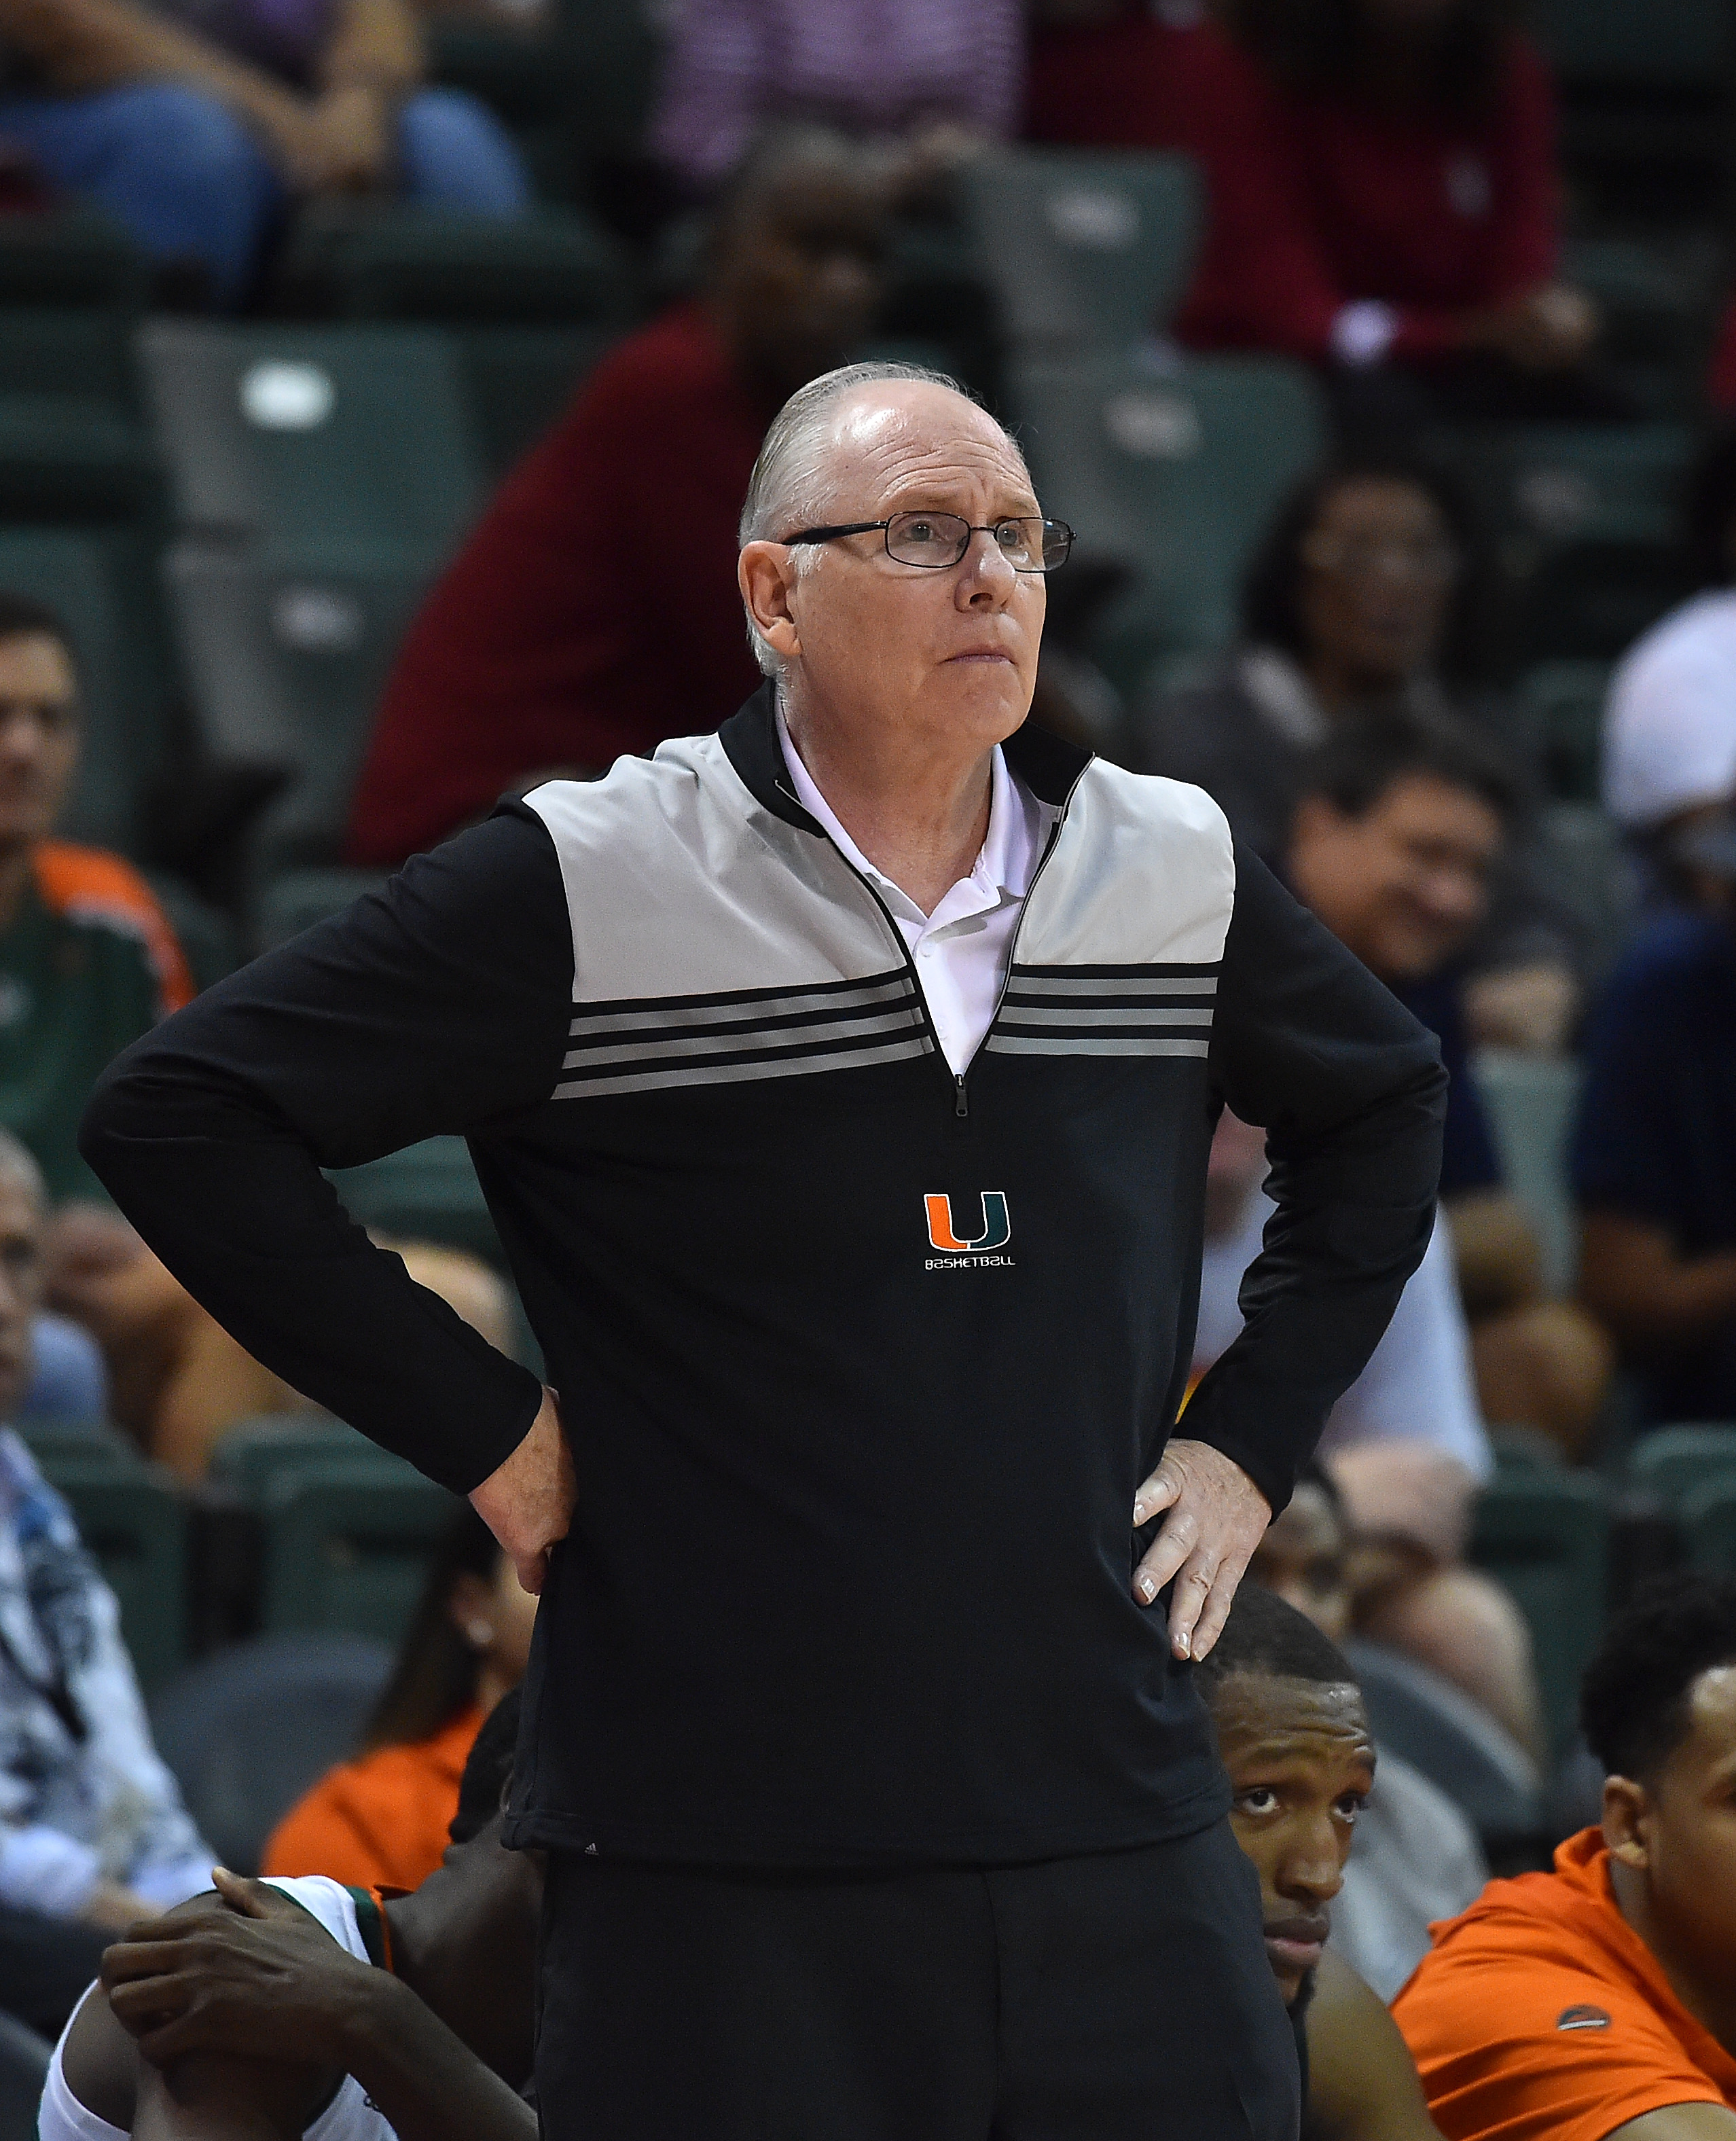 Nov 24, 2016; Kissimmee, FL, USA; Miami Hurricanes head coach Jim Larranaga looks on in the game against the Stanford Cardinal during the second half at HP Field House. The Miami Hurricanes defeat the Stanford Cardinal 67-53. Mandatory Credit: Jasen Vinlove-USA TODAY Sports